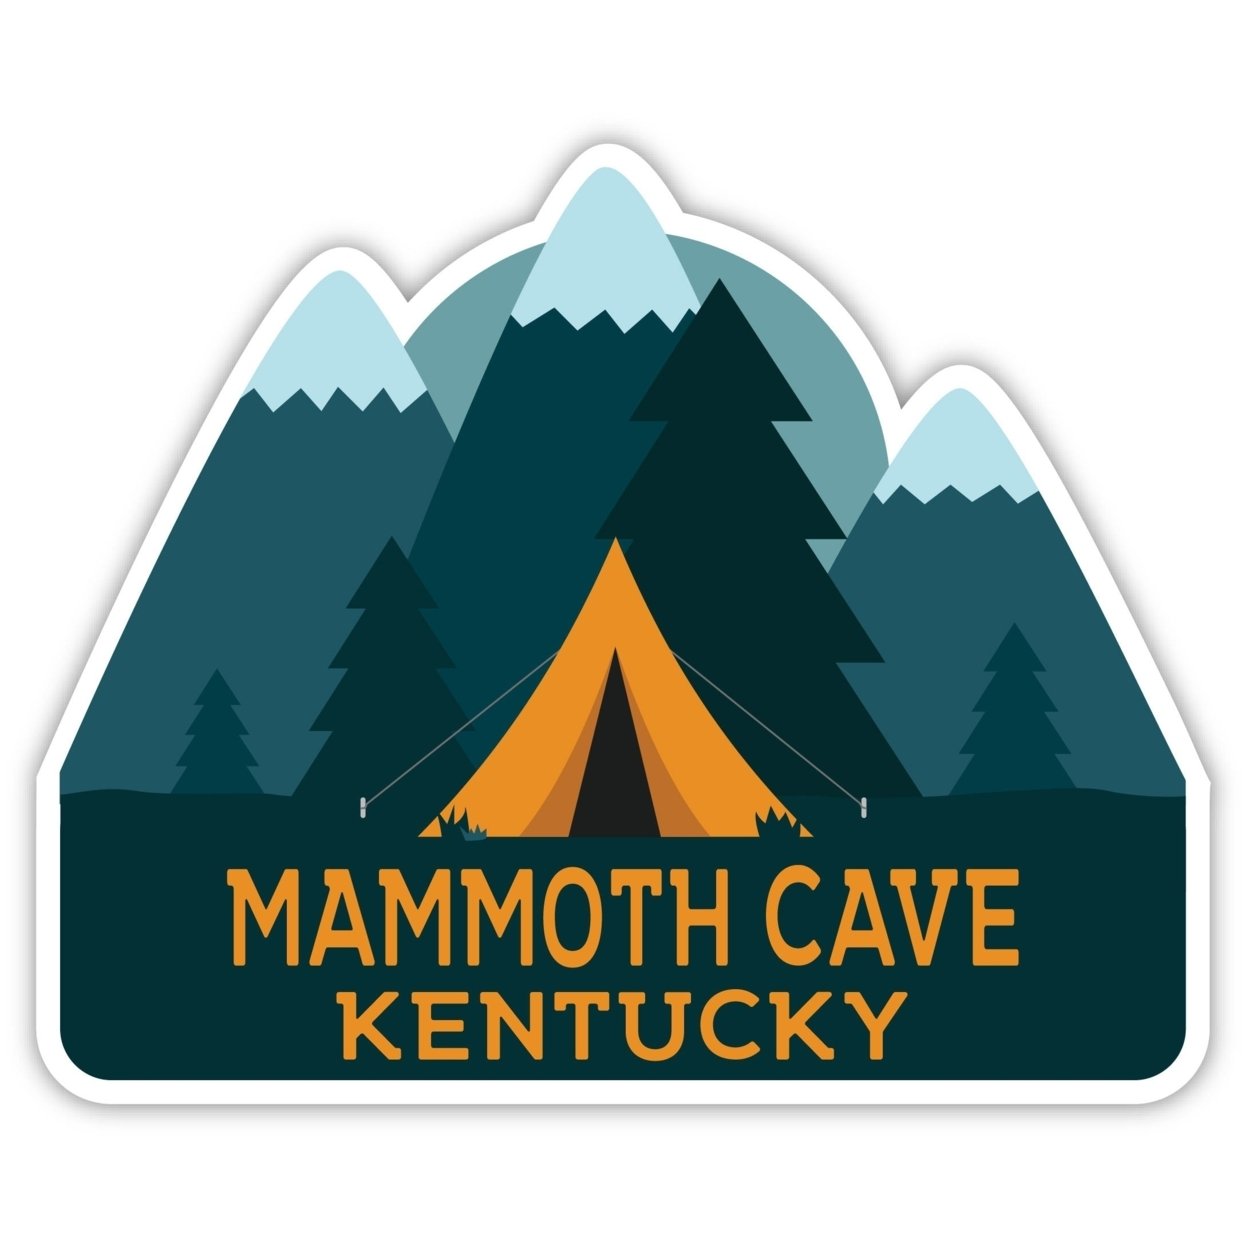 Mammoth Cave Kentucky Souvenir Decorative Stickers (Choose Theme And Size) - 4-Inch, Tent